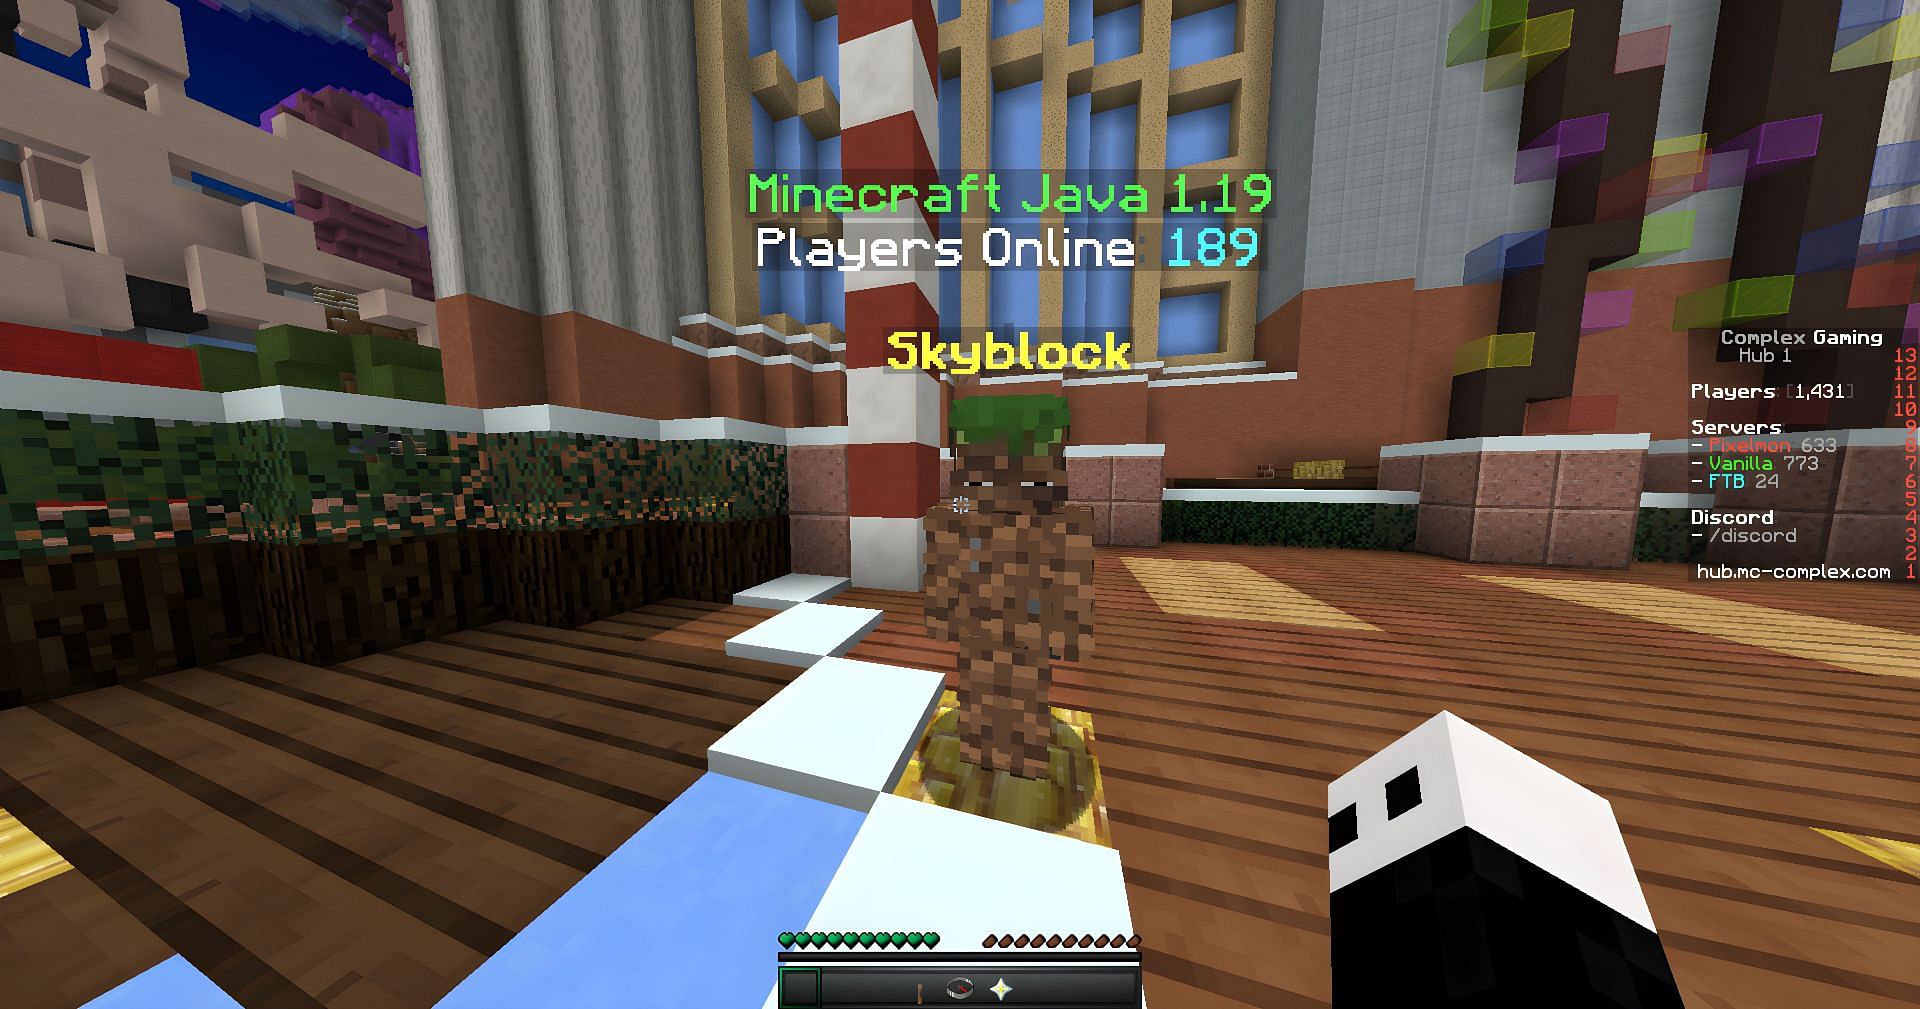 Complex Gaming is a Skyblock server that also includes Pixelmon and Factions (Image via Mojang)